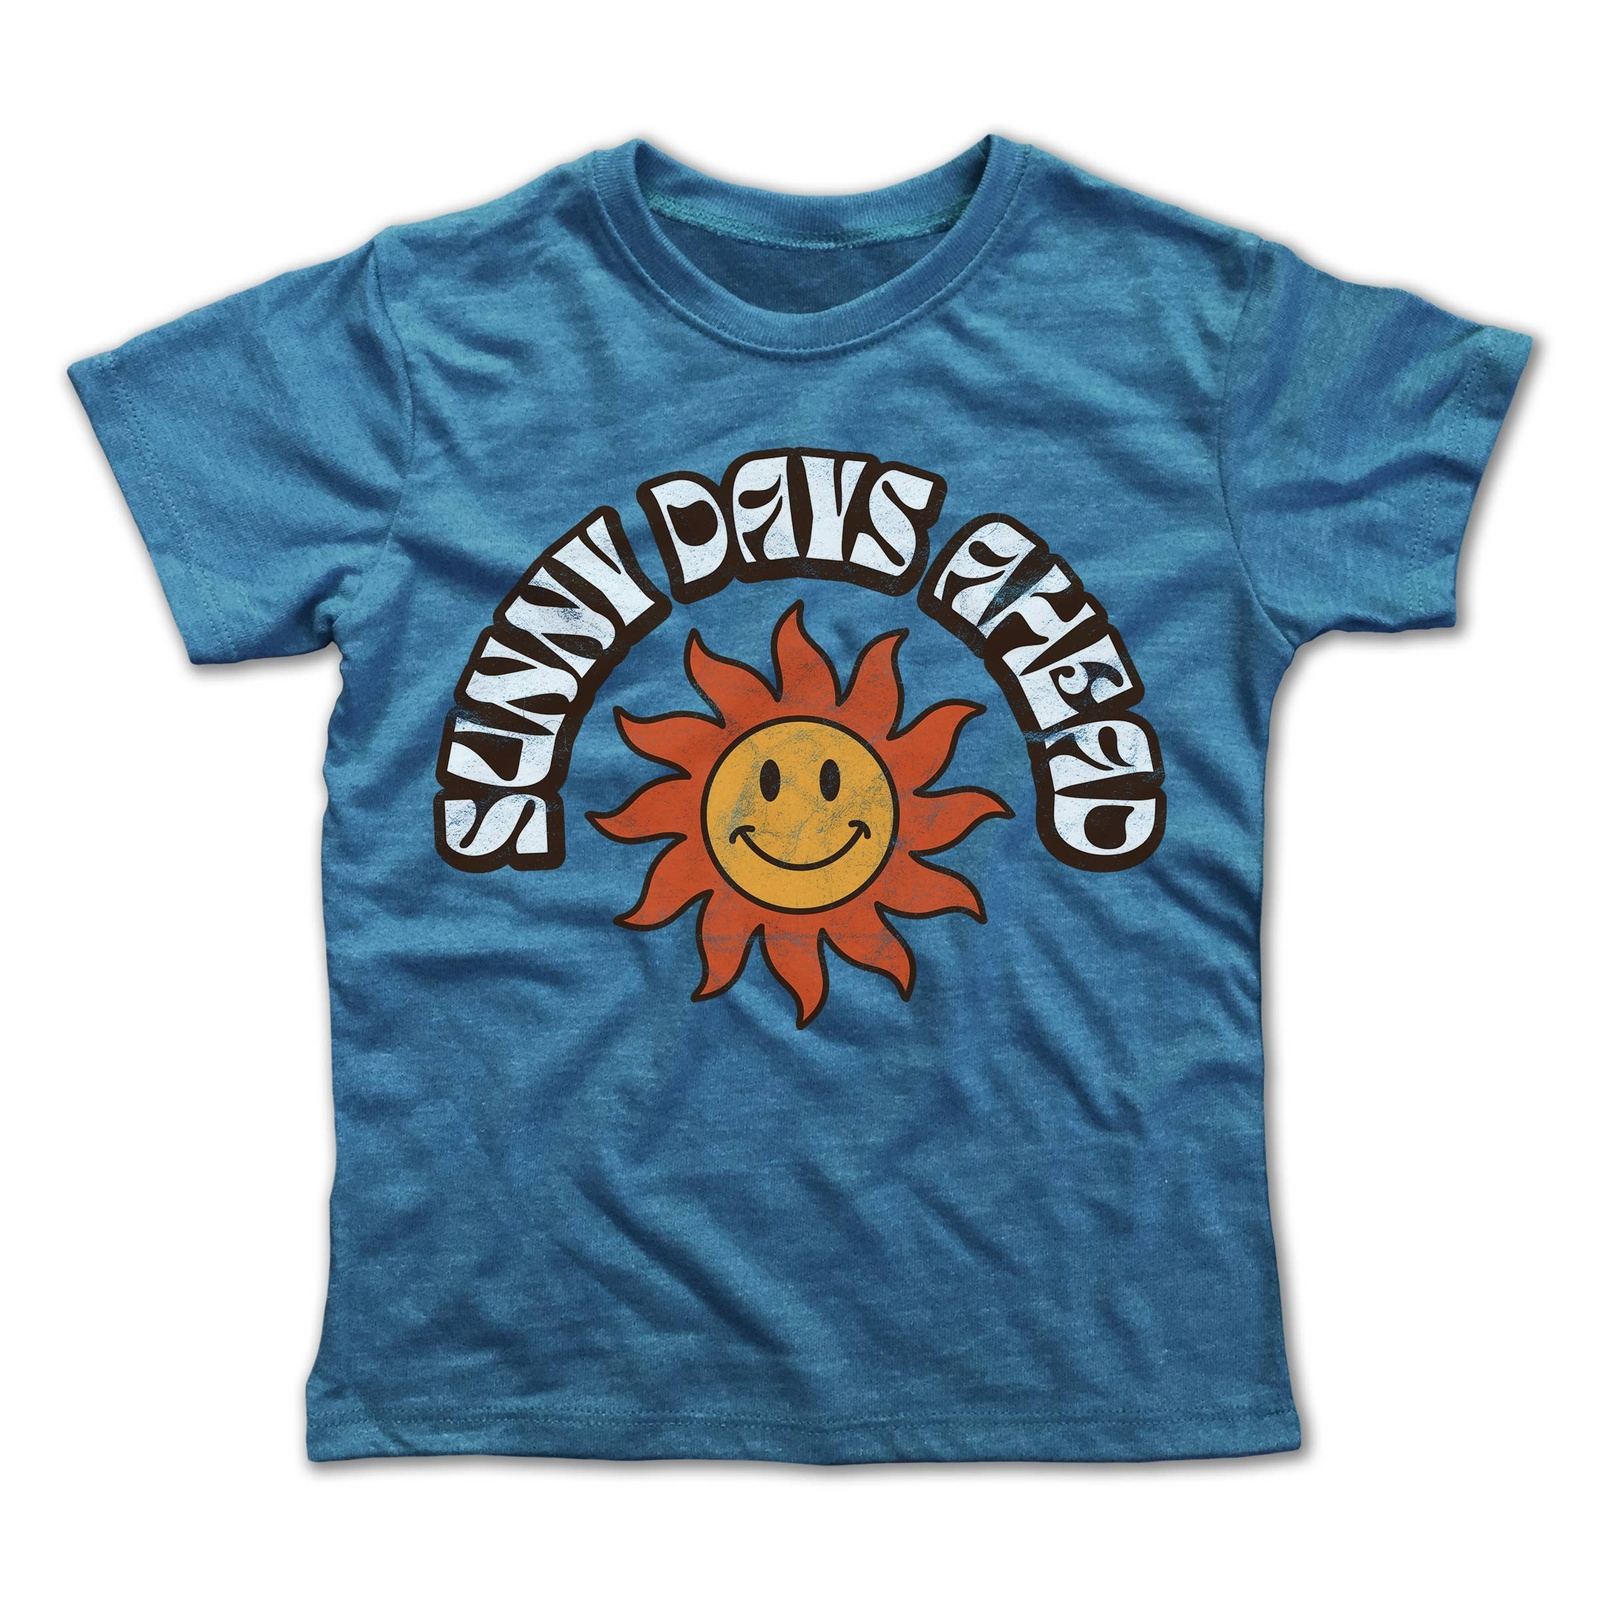 Sunny Days Ahead Tee Tea for Three: A Children's Boutique